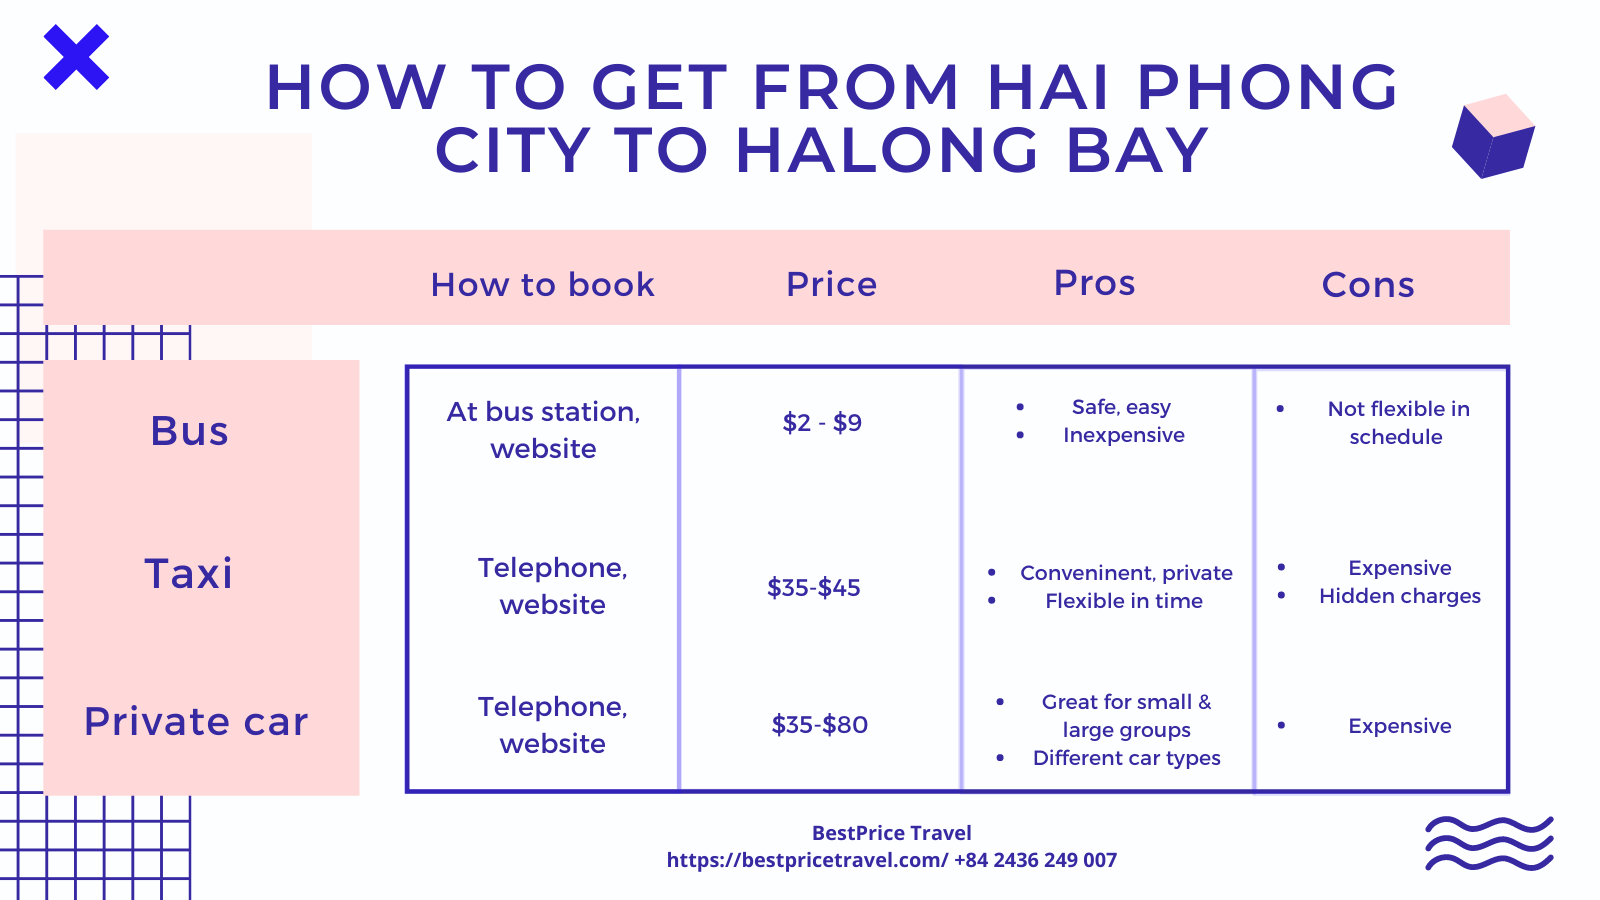 how to get to Halong Bay from Hai Phong 